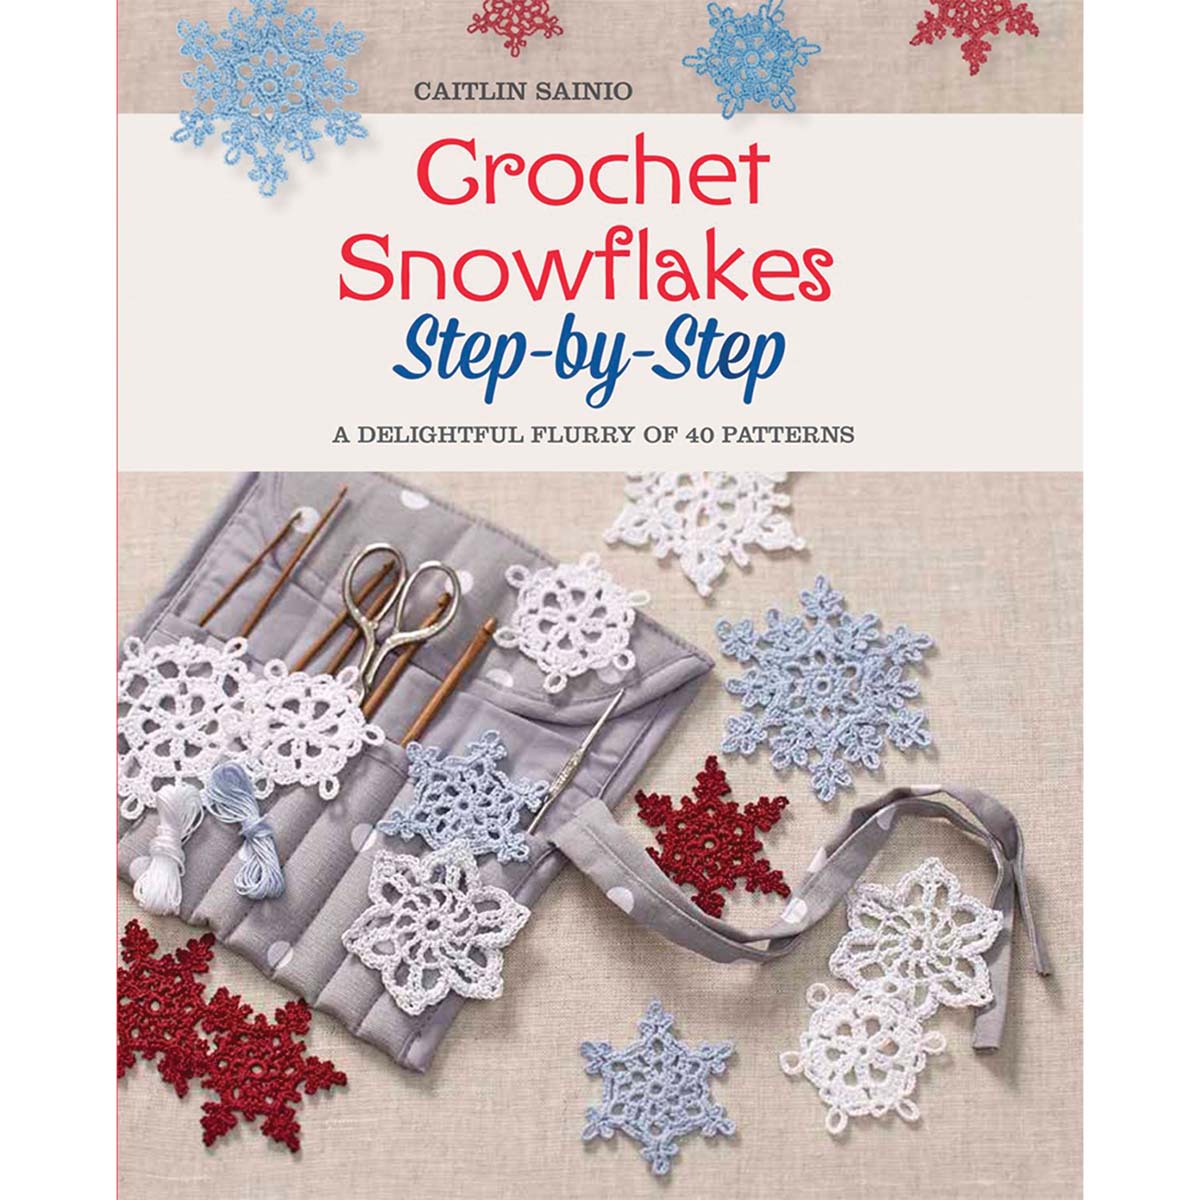 Macmillan Press Crochet Snowflakes Step-by-Step: A Delightful Flurry of 40 Patterns for Beginners Crochet Book